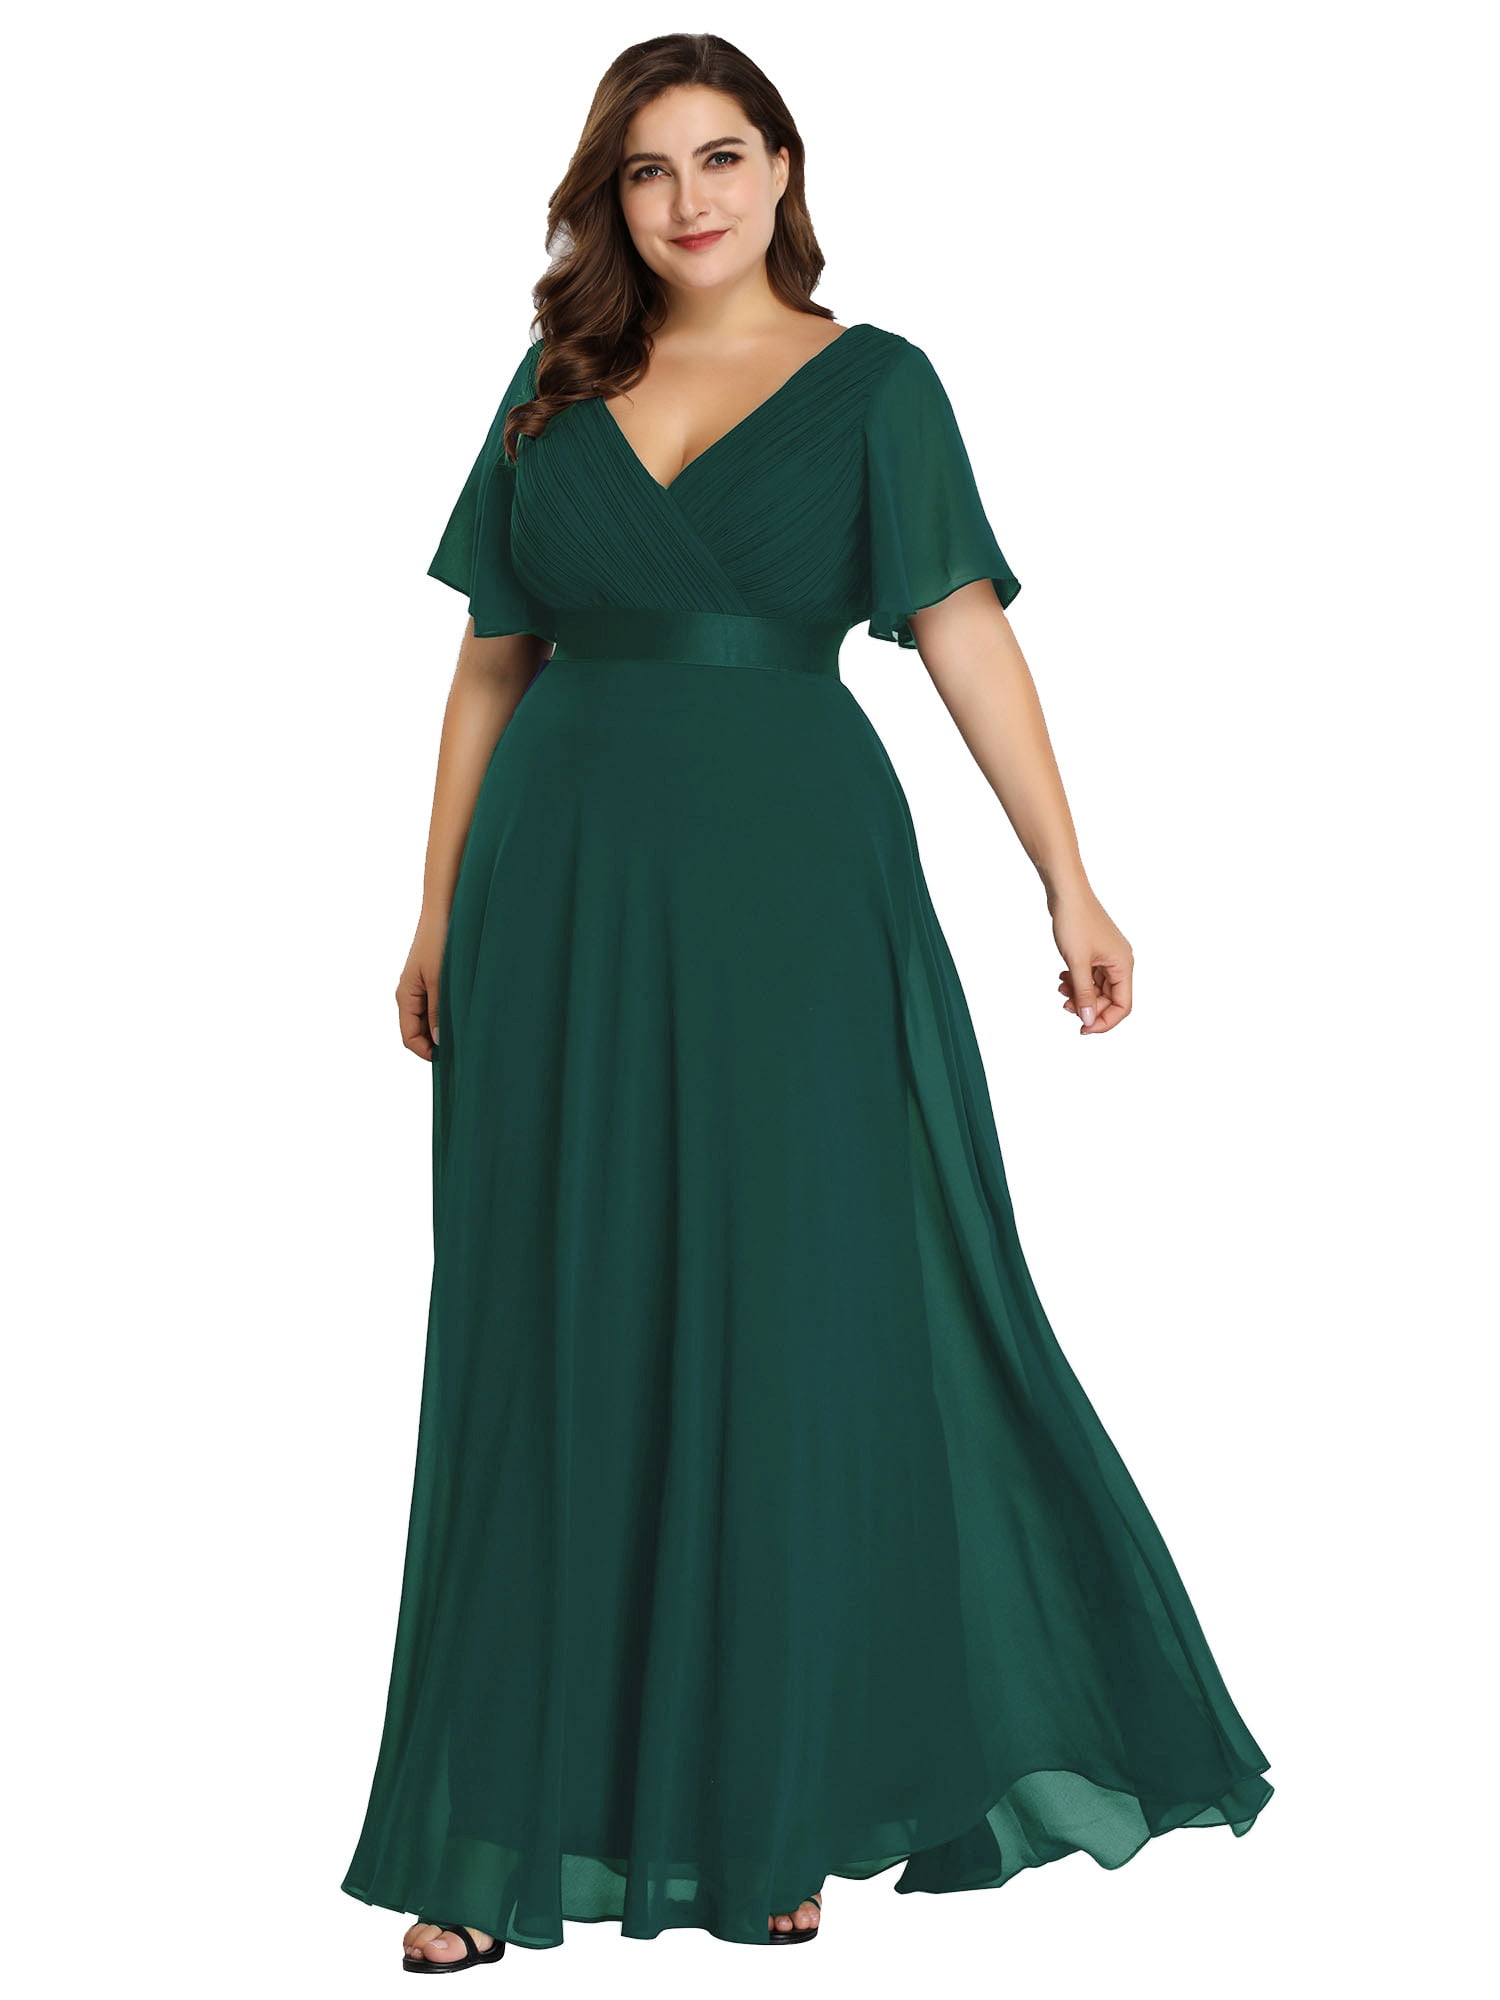 dresses for 70 year old wedding guest